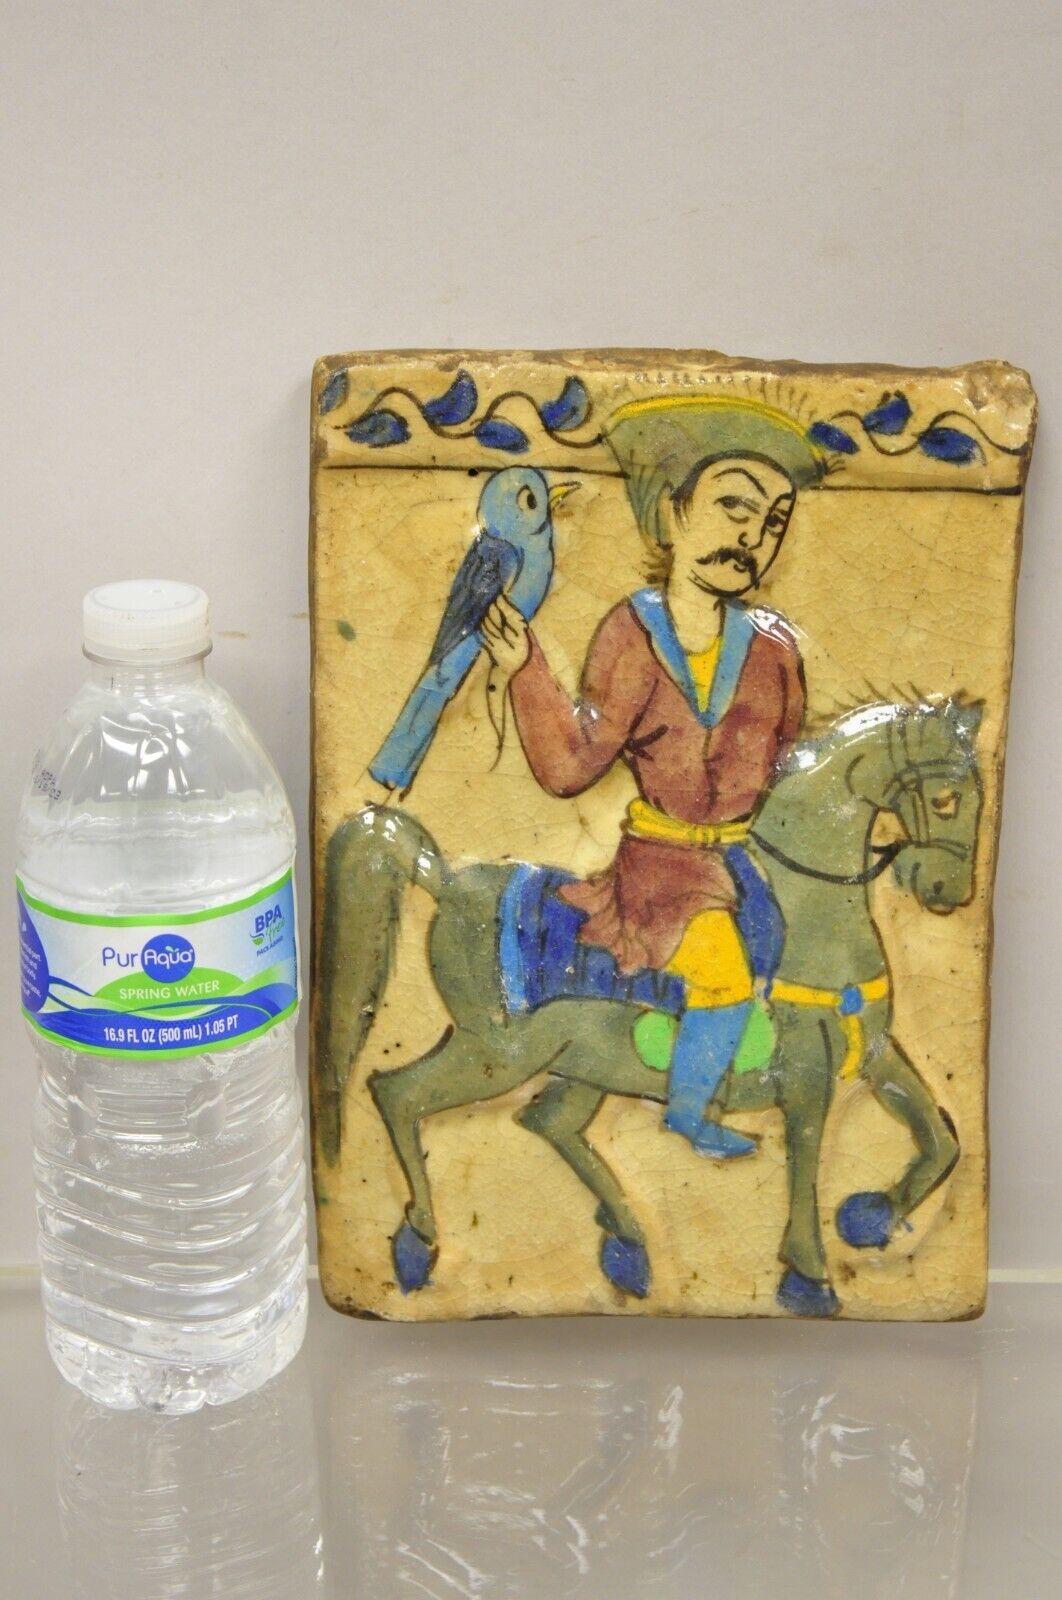 Antique Persian Iznik Qajar Style ceramic pottery tile horse rider with Blue Bird C5. Item features original crackle glazed finish, heavy ceramic pottery construction, very impressive detail, wonderful style and form. Great to mount as wall art or